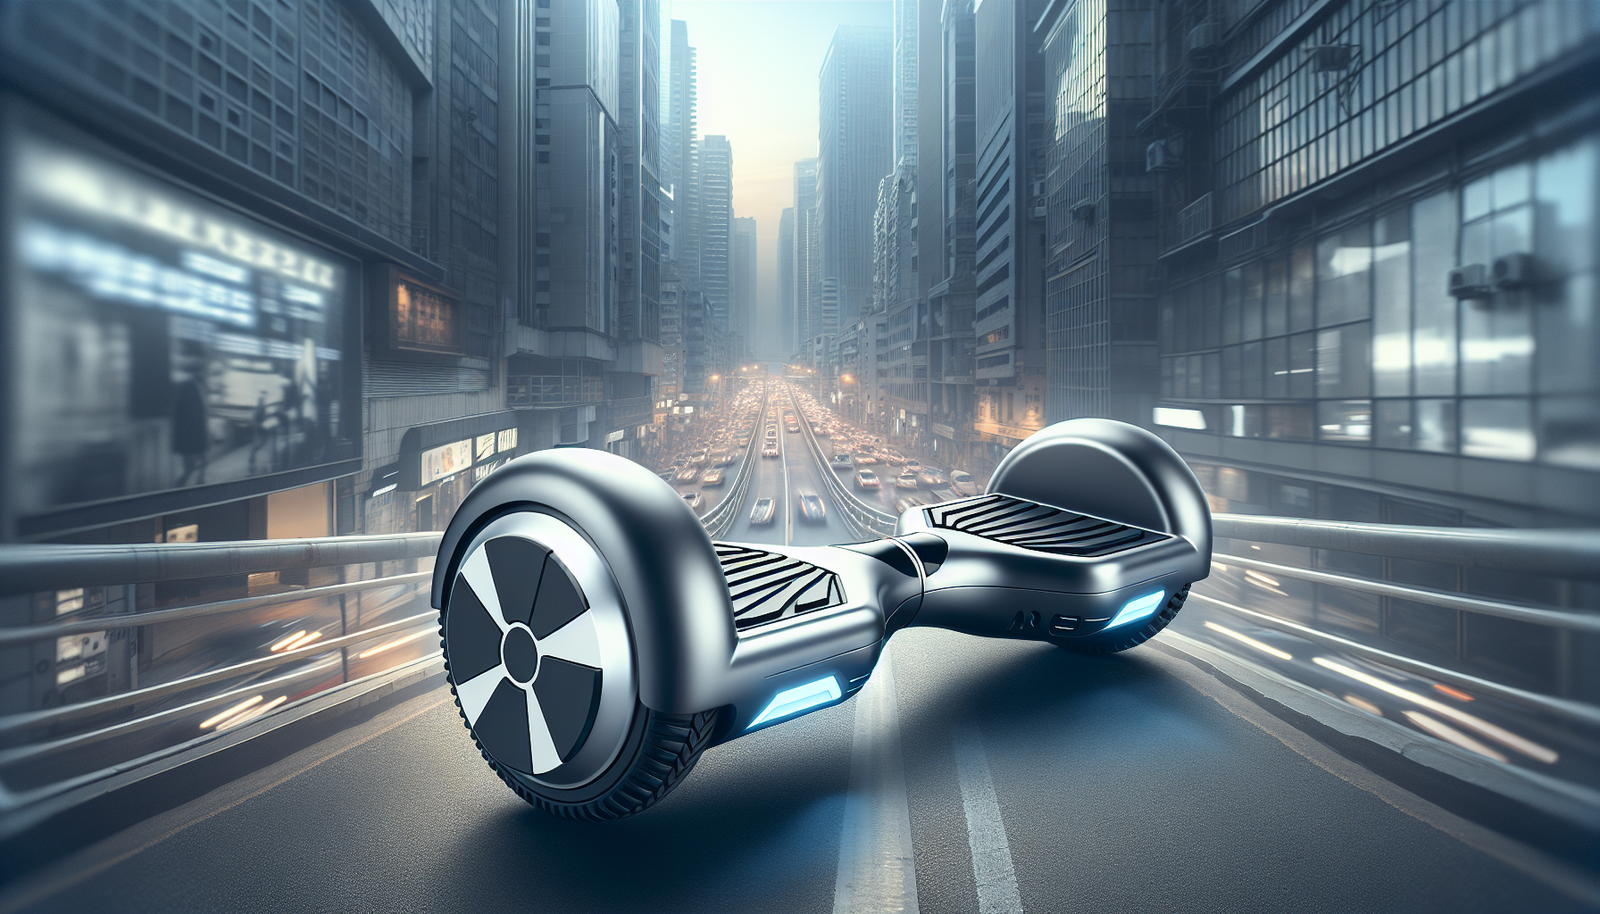 Can I Use A Hoverboard On Public Transportation?